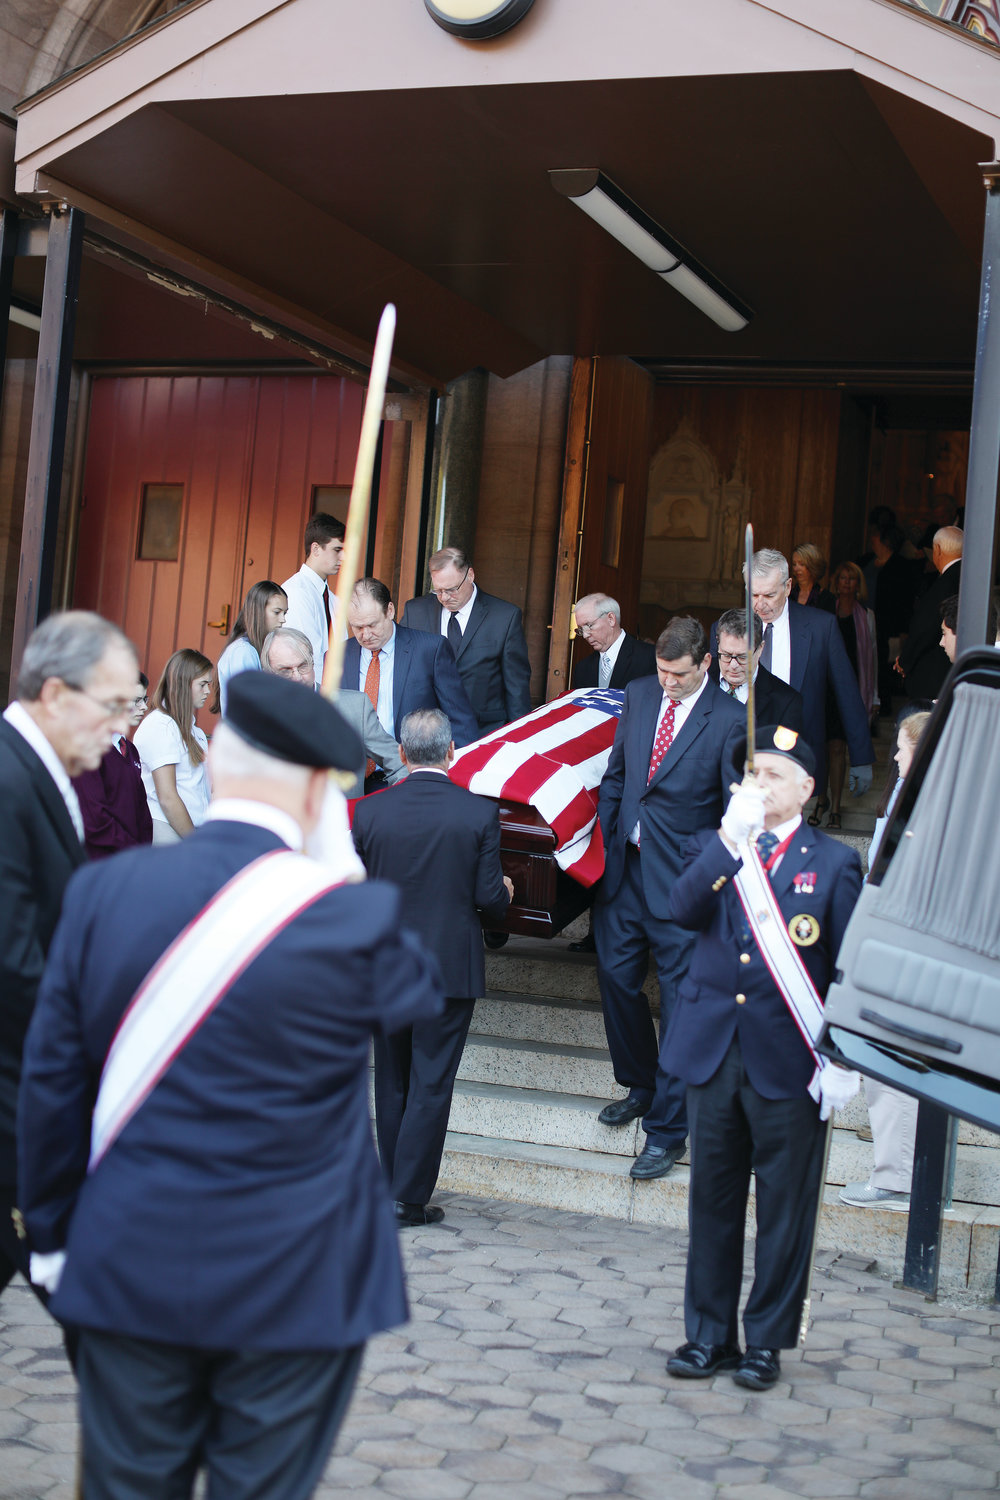 Knights of Columbus salute Bishop Roque as he leaves the Cathedral for the final time.